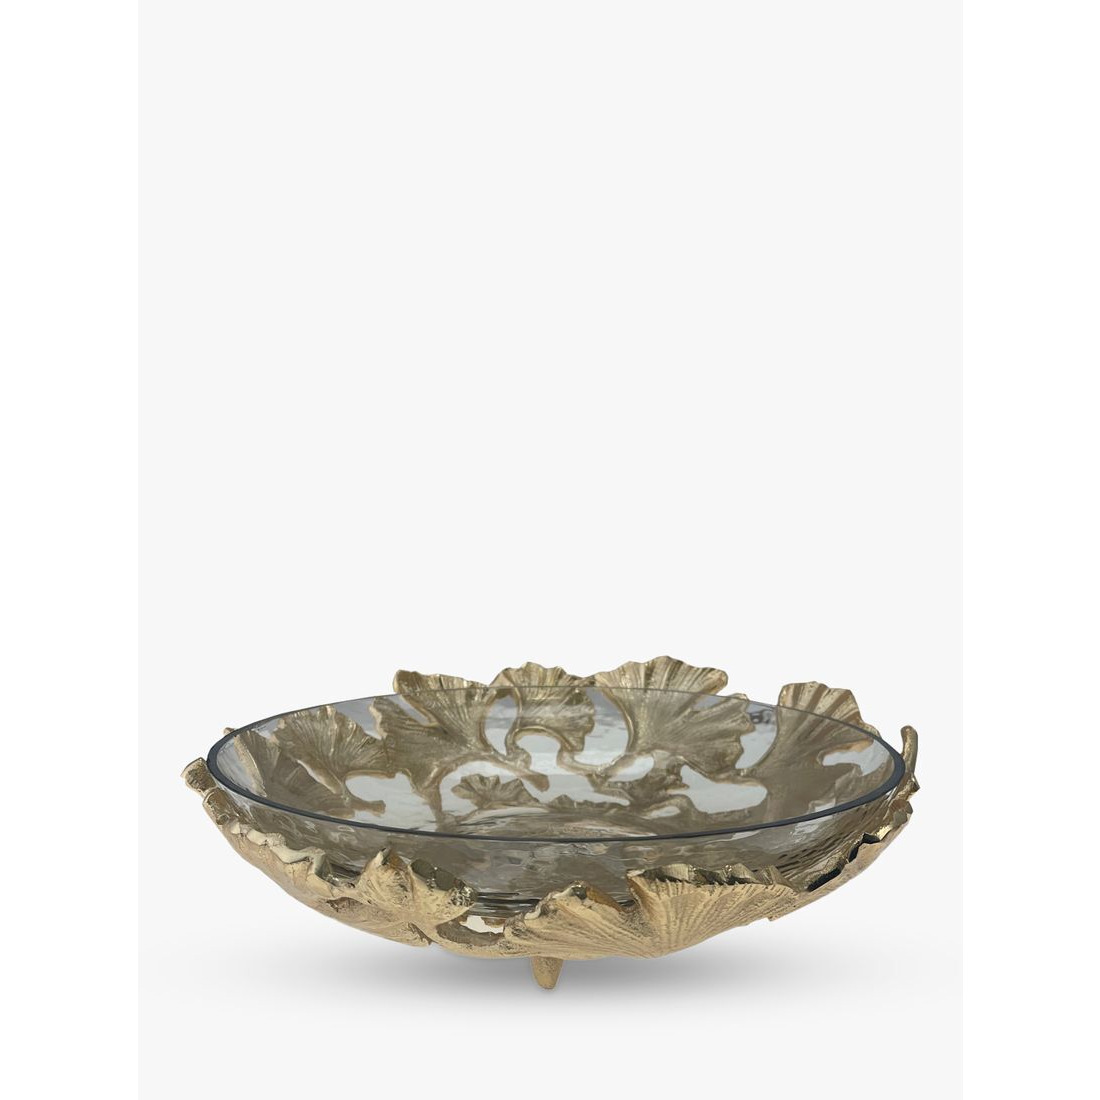 Culinary Concepts Ginkgo Leaf Decorative Bowl, 33cm, Gold/Clear - image 1